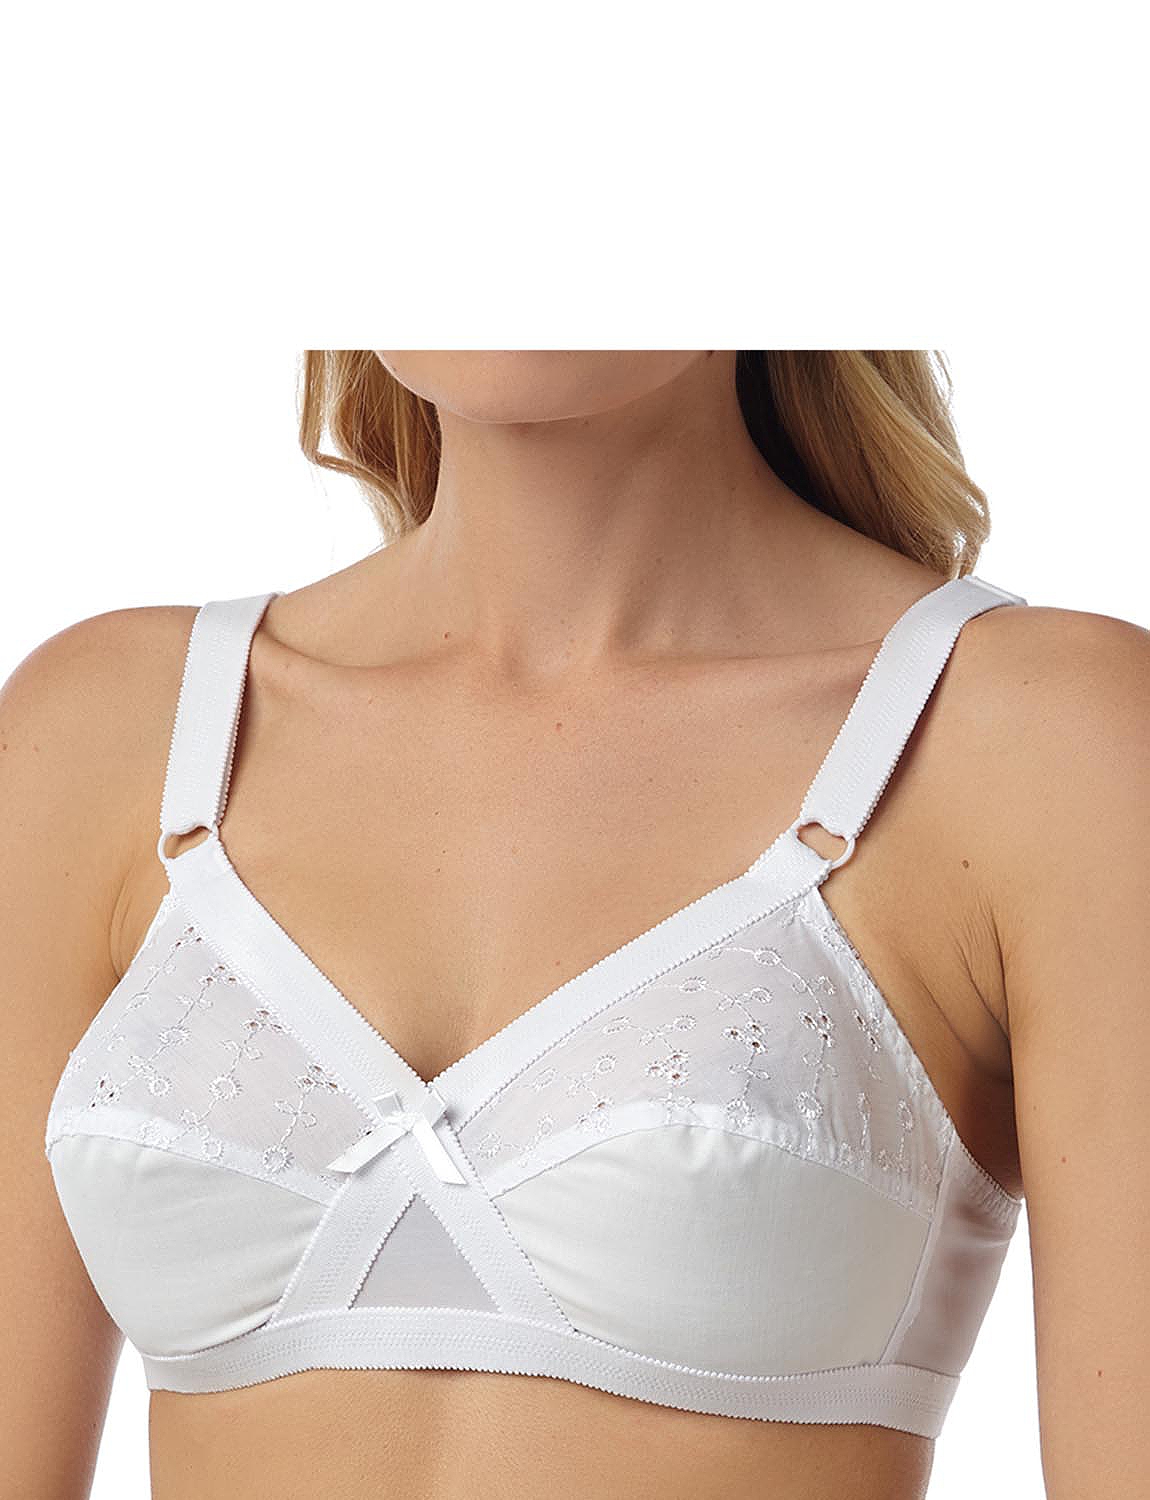 Marlon 2 x Firm Control Soft Cup Bra BR404 White 34C at  Women's  Clothing store